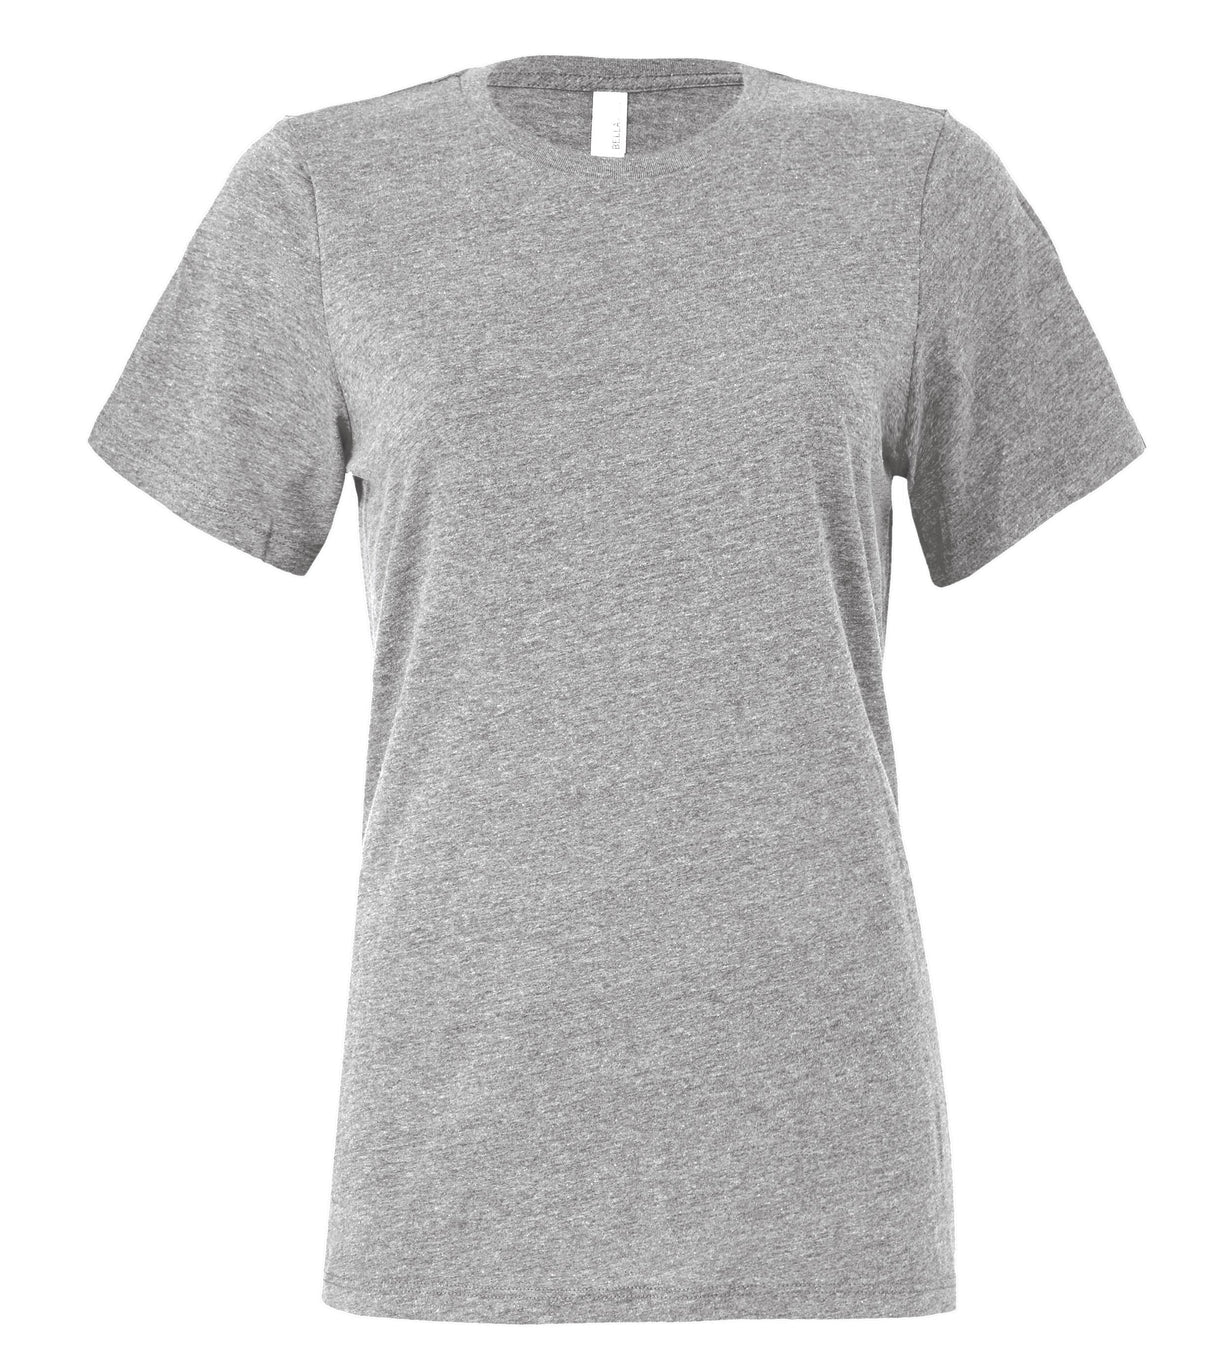 Bella Canvas Women's Relaxed Jersey Short Sleeve Tee - Athletic Heather